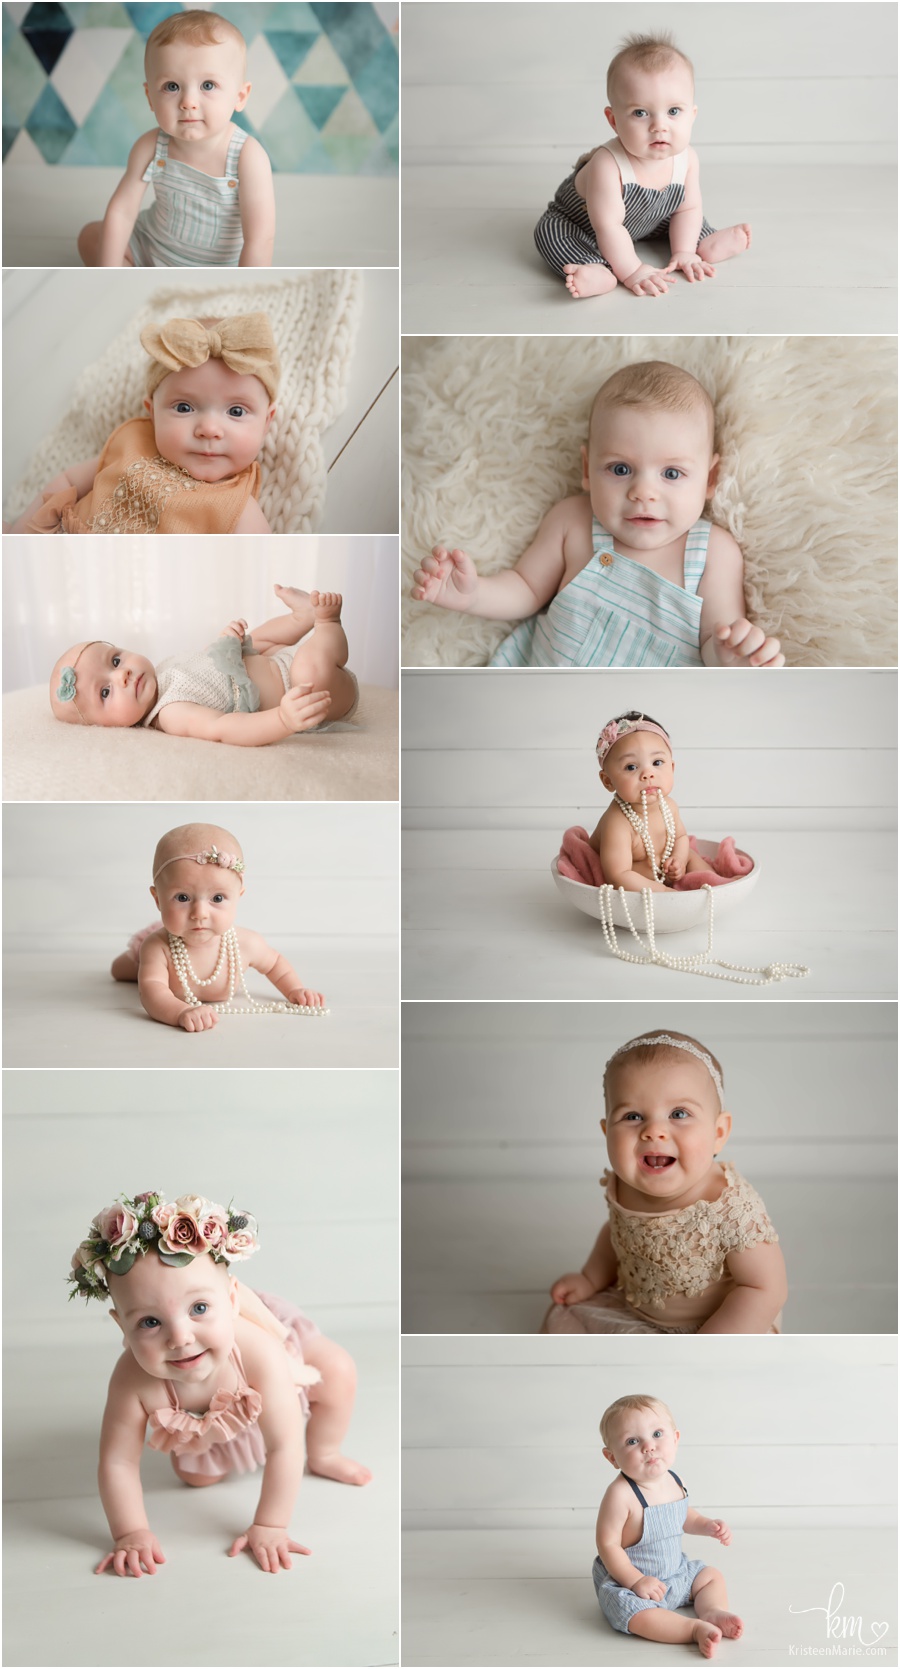 4 Month Milestone Session - Indianapolis Child Photographer · KristeenMarie  Photography